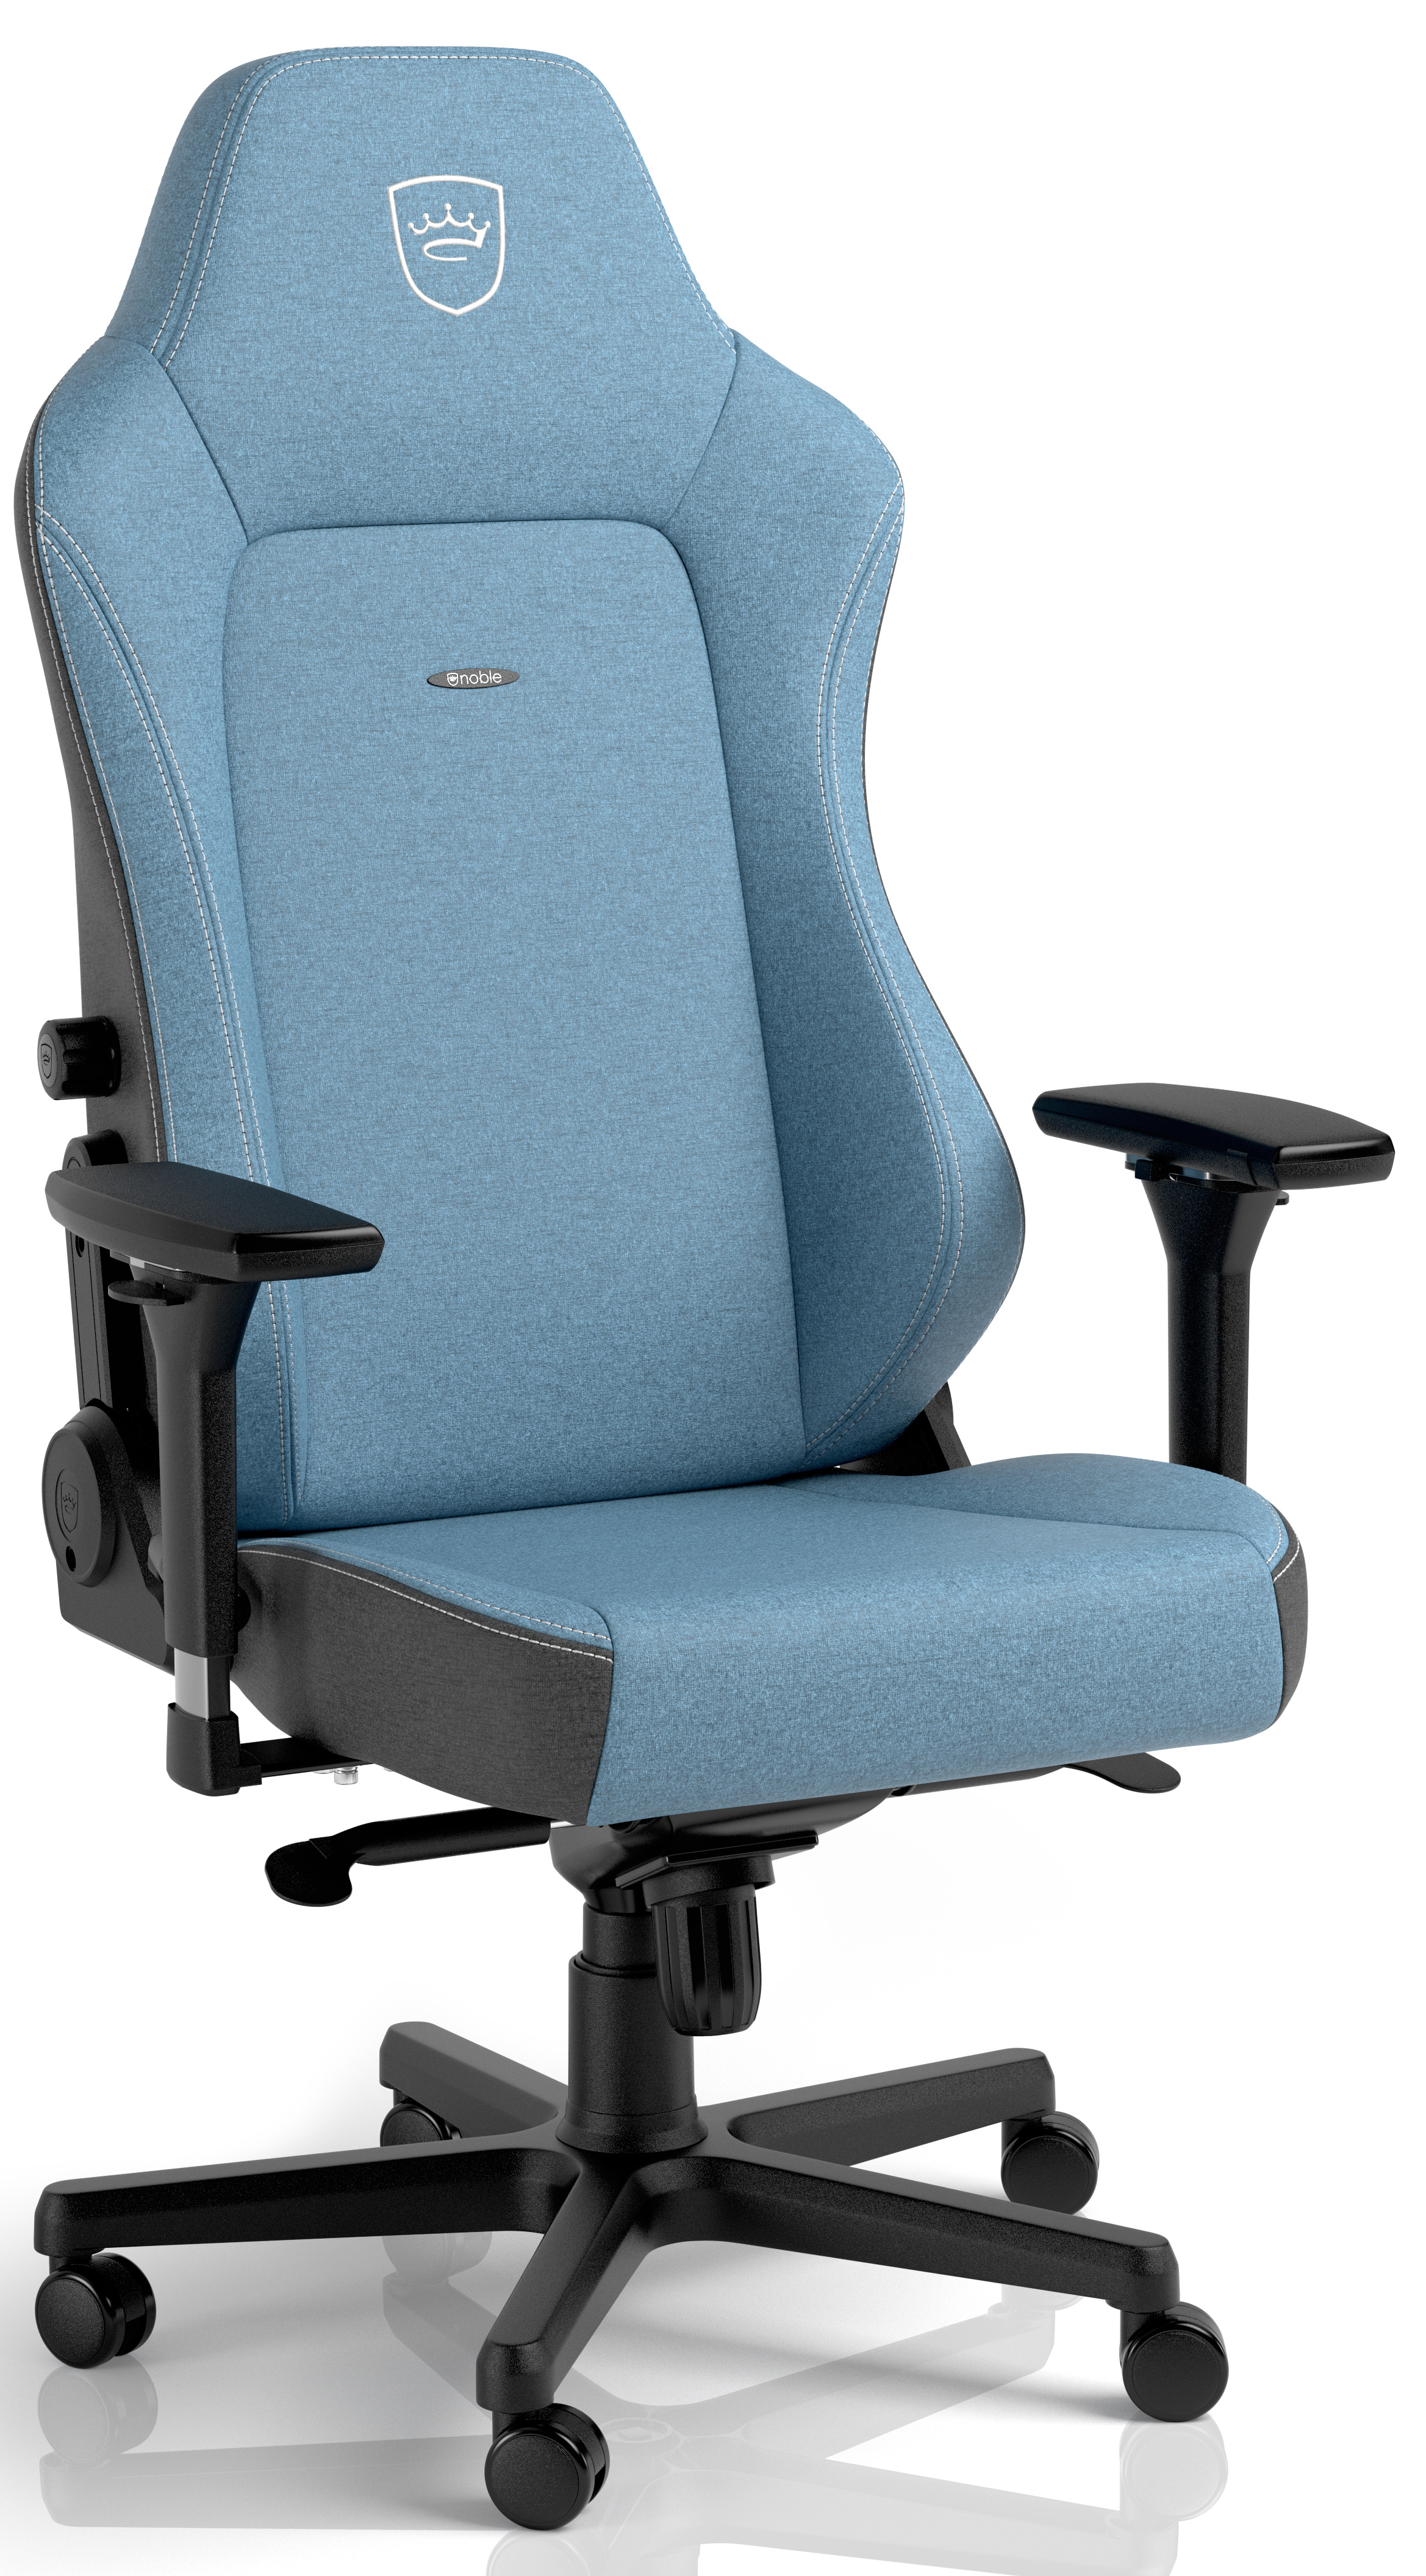 ** B Grade ** Cadeira noblechairs Hero Two Tone - Blue Limited Edition